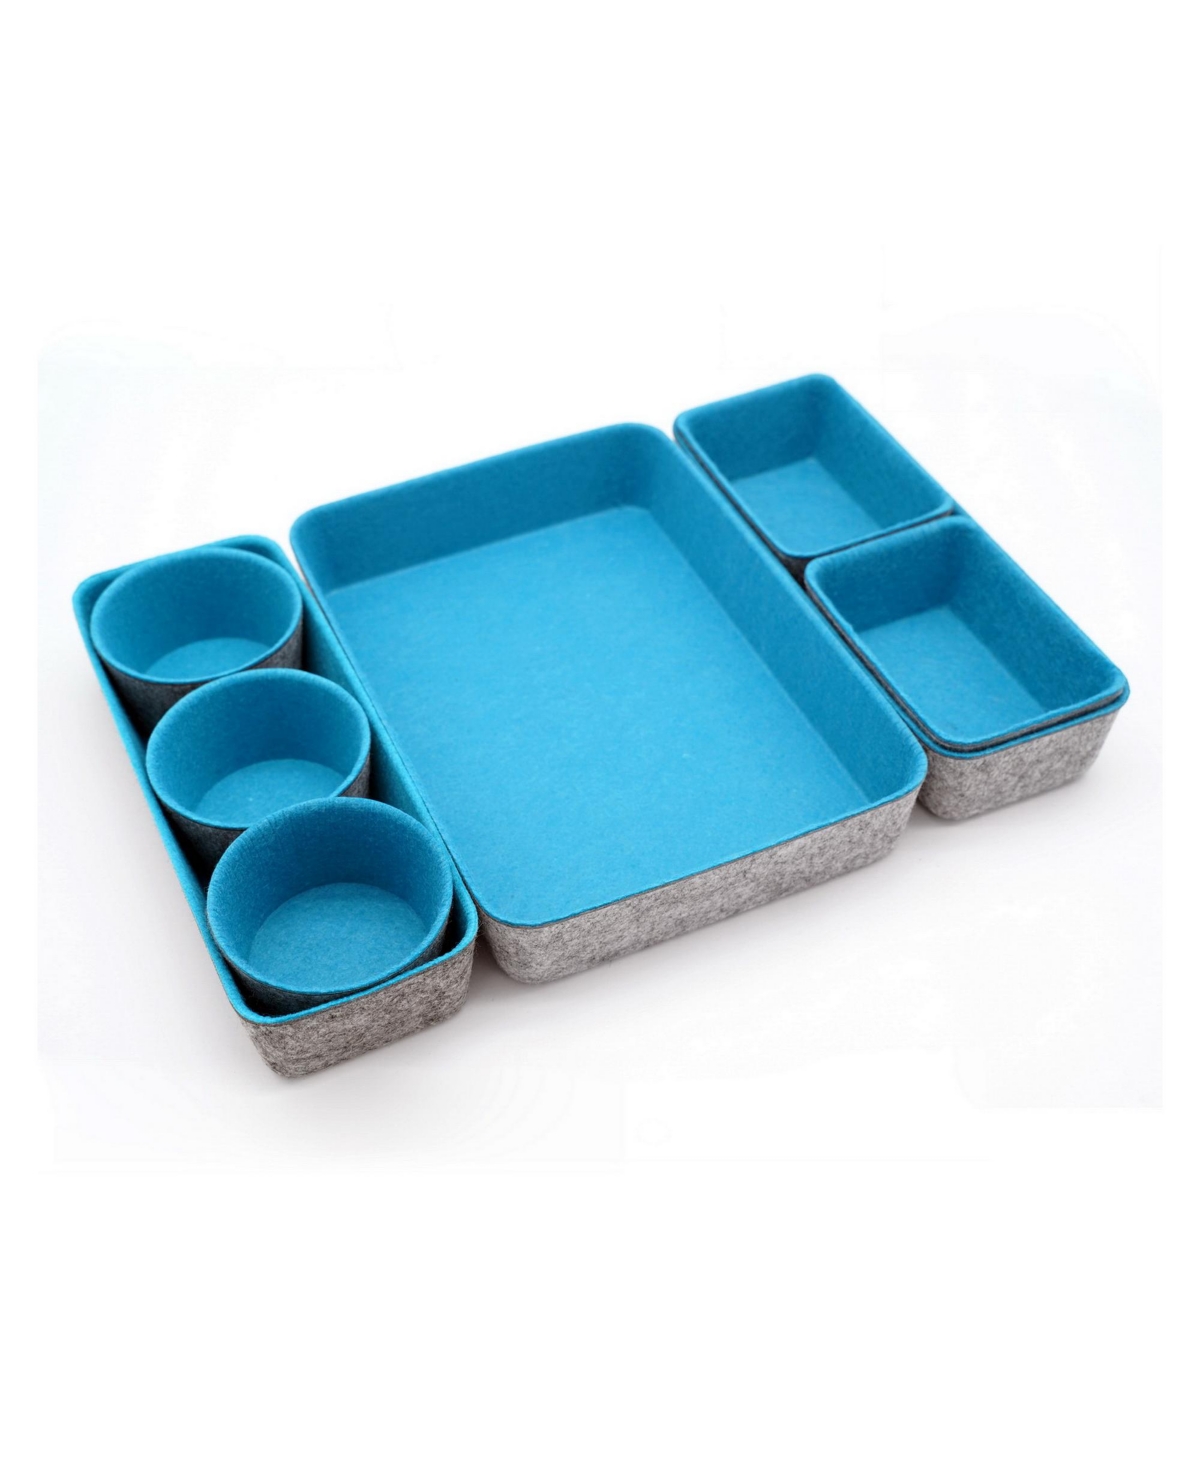 Shop Welaxy 8 Piece Felt Drawer Organizer Set With Round Cups And Trays In Turquoise